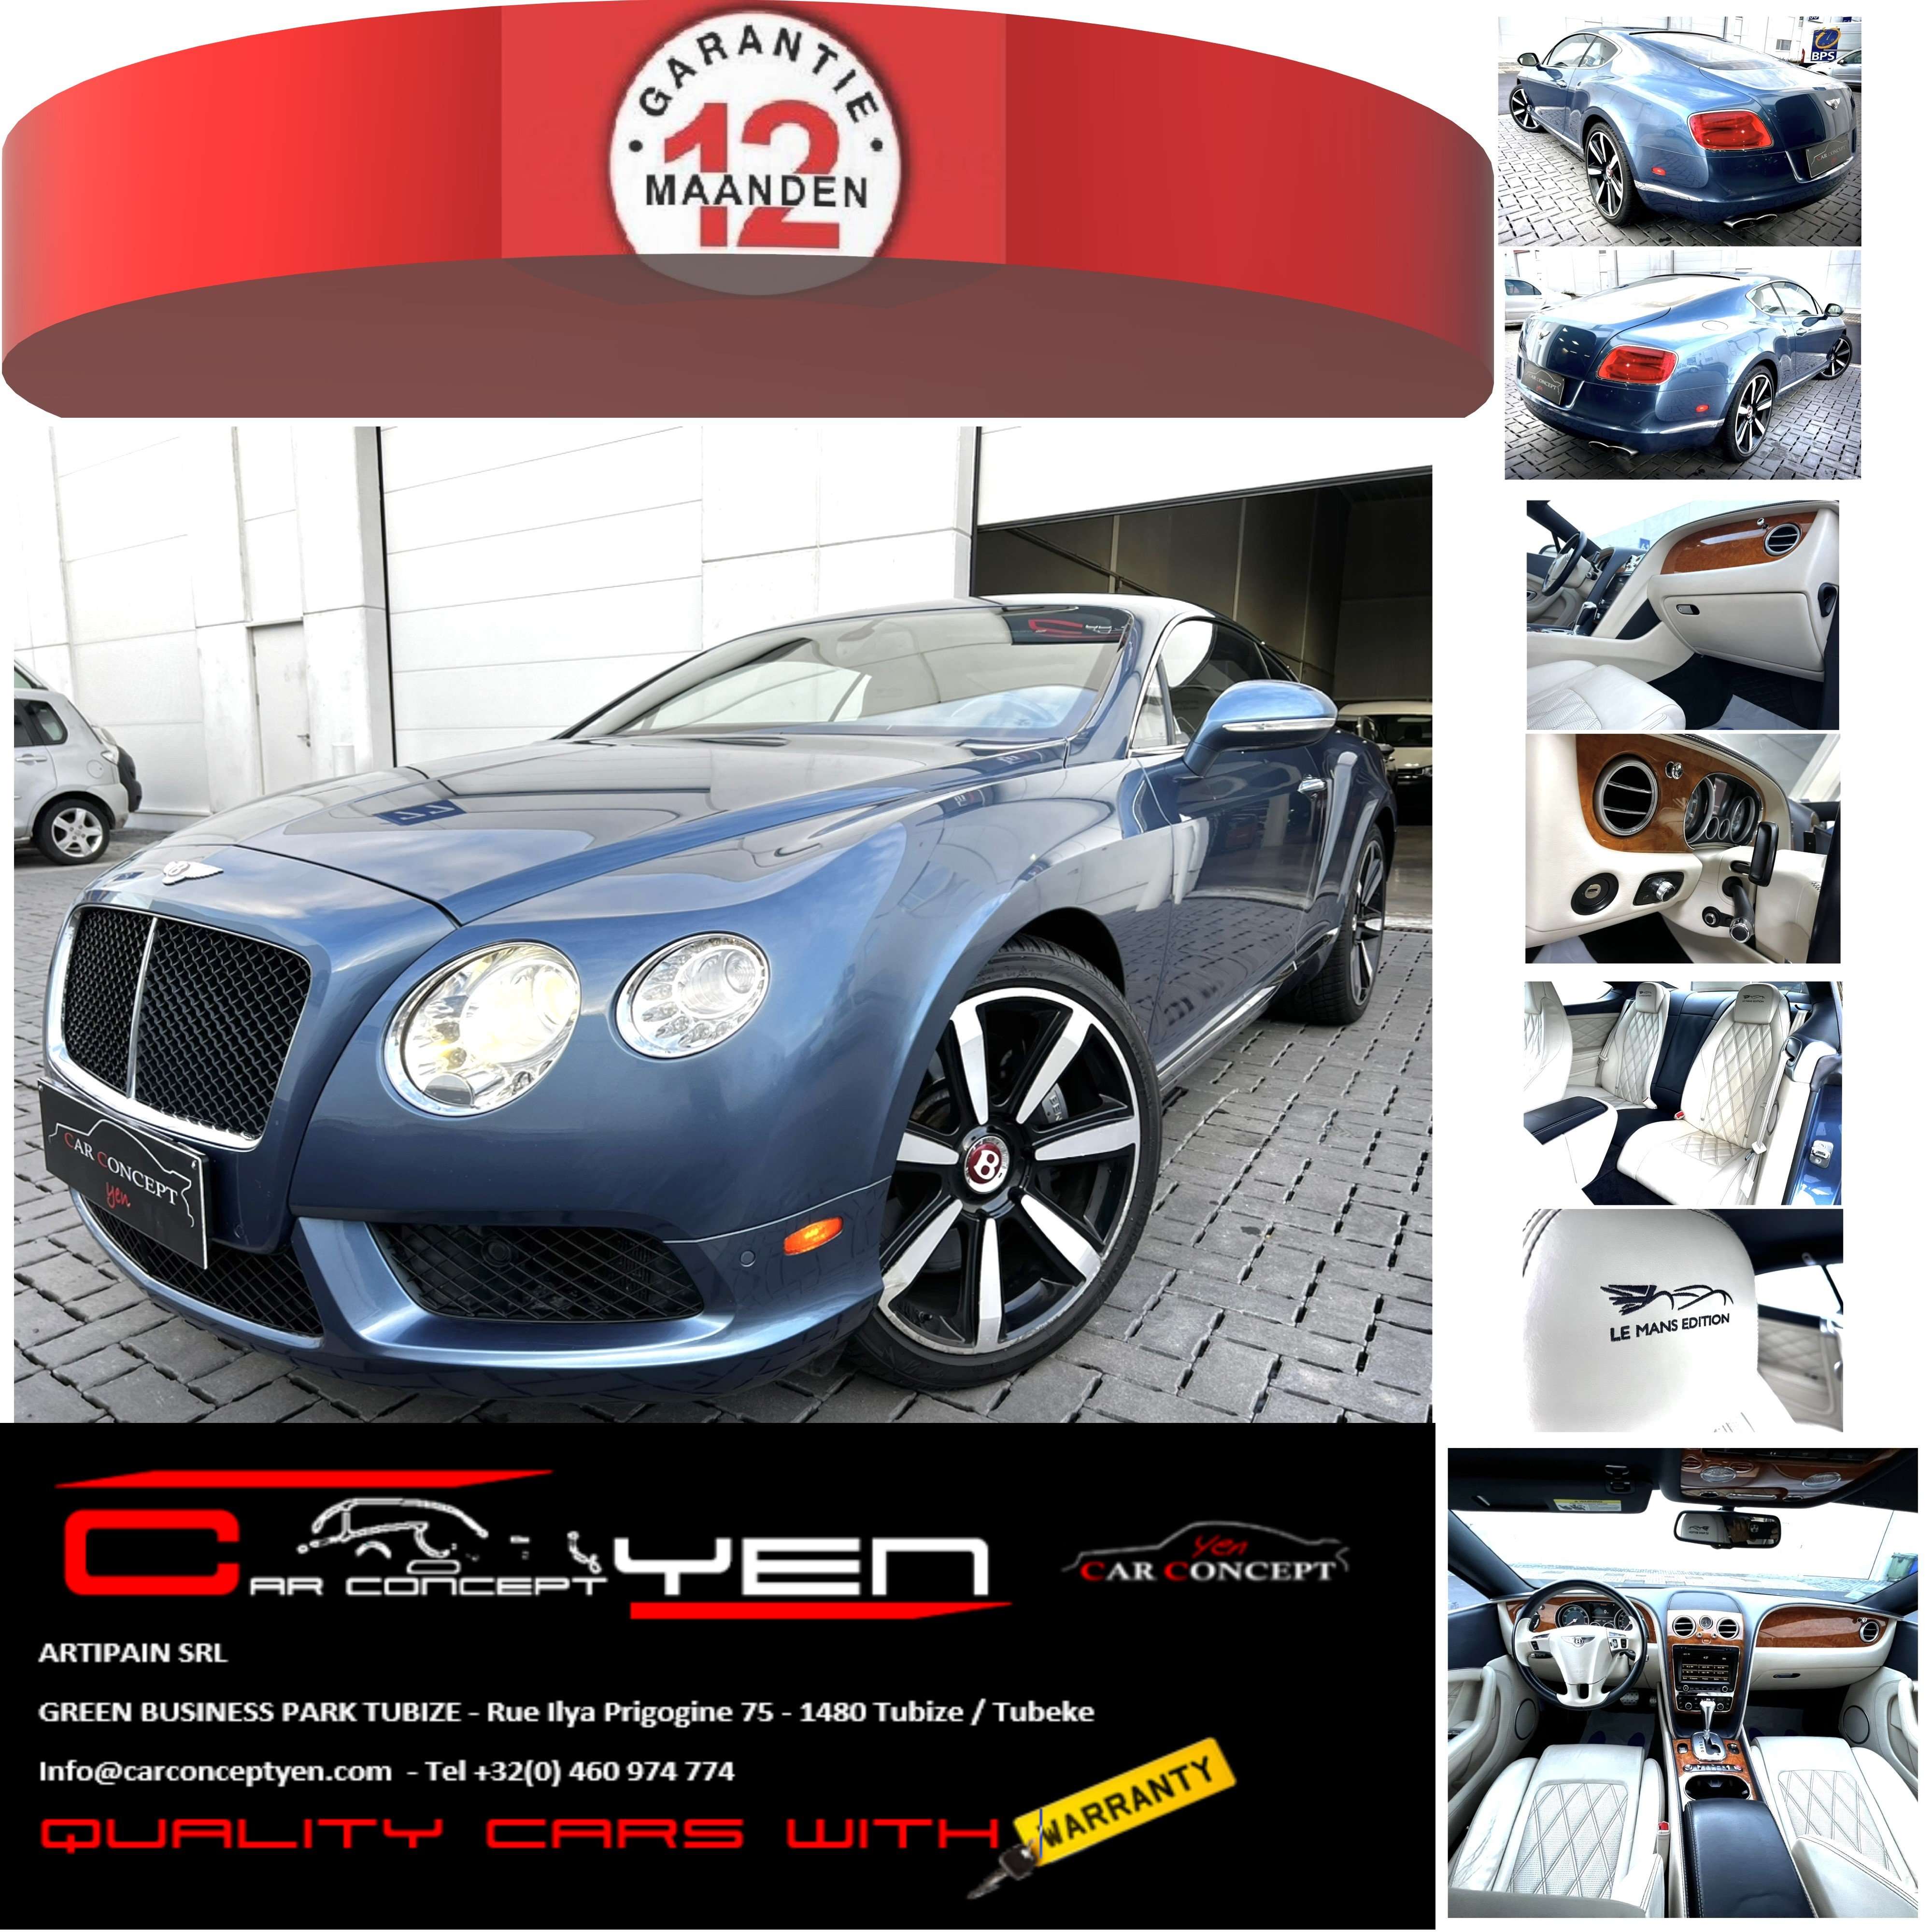 Bentley Continental Coupe in Blue used in Tubize / Tubeke for € 76,900.-